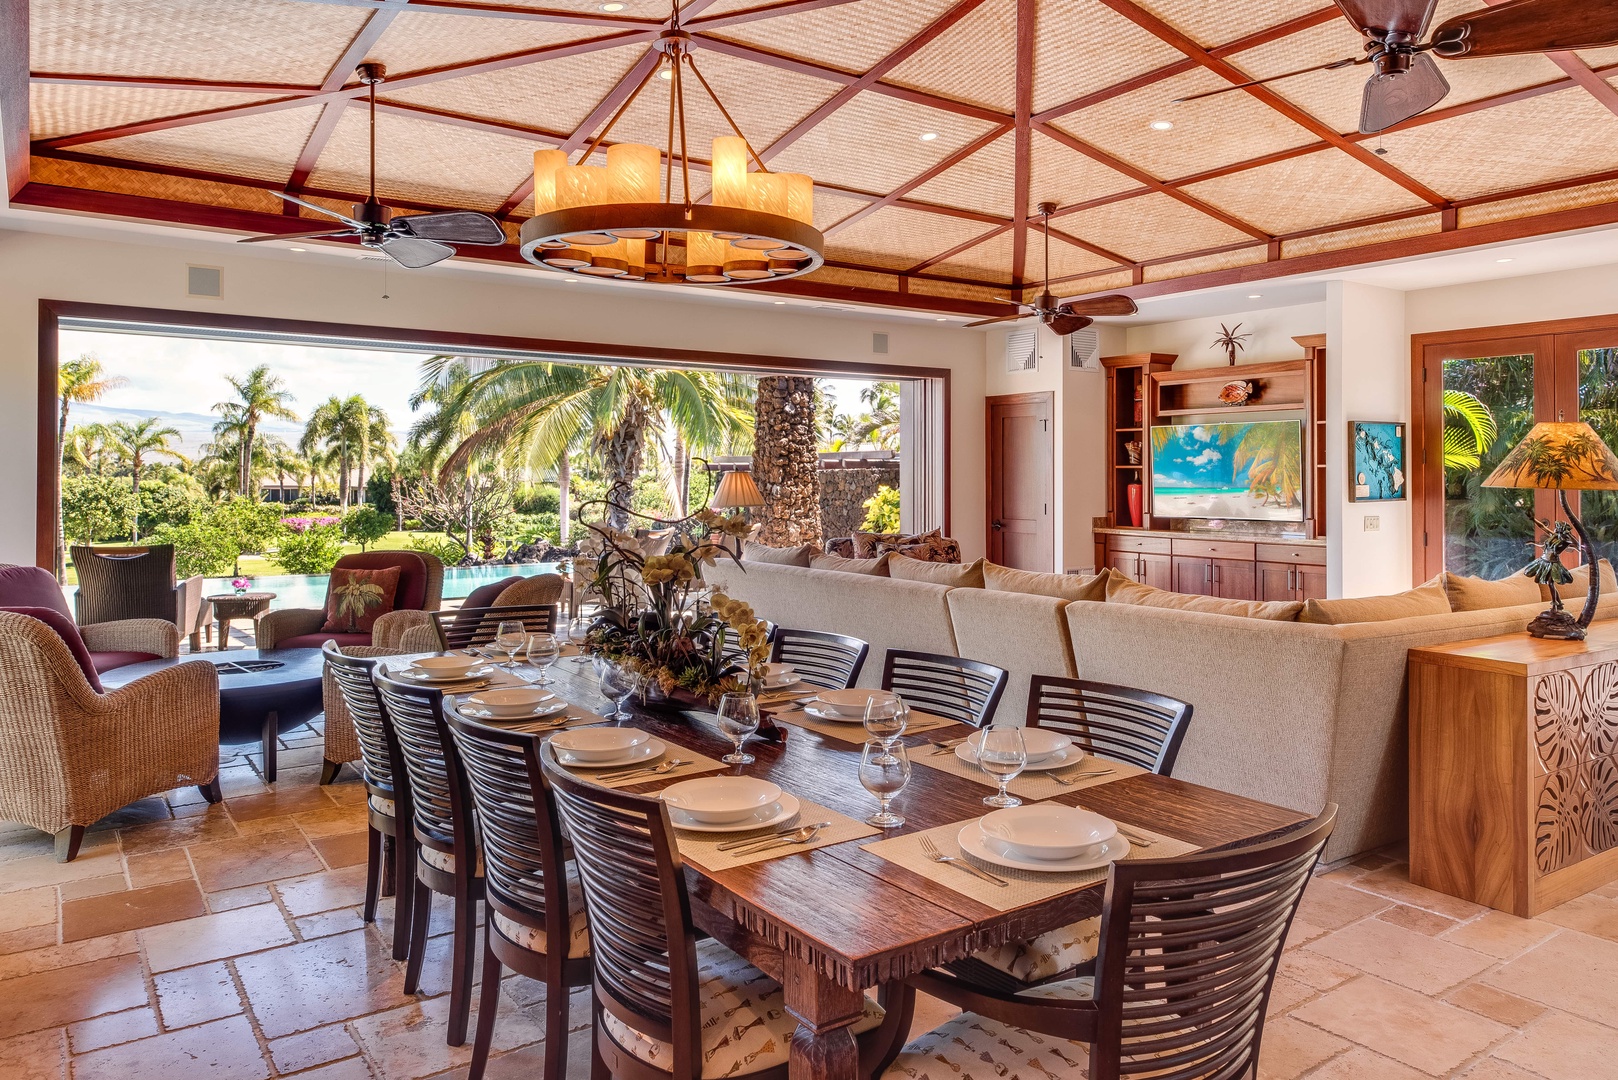 Kamuela Vacation Rentals, House of the Turtle at Champion Ridge, Mauna Lani (CR 18) - An elegant dining area with table for ten.